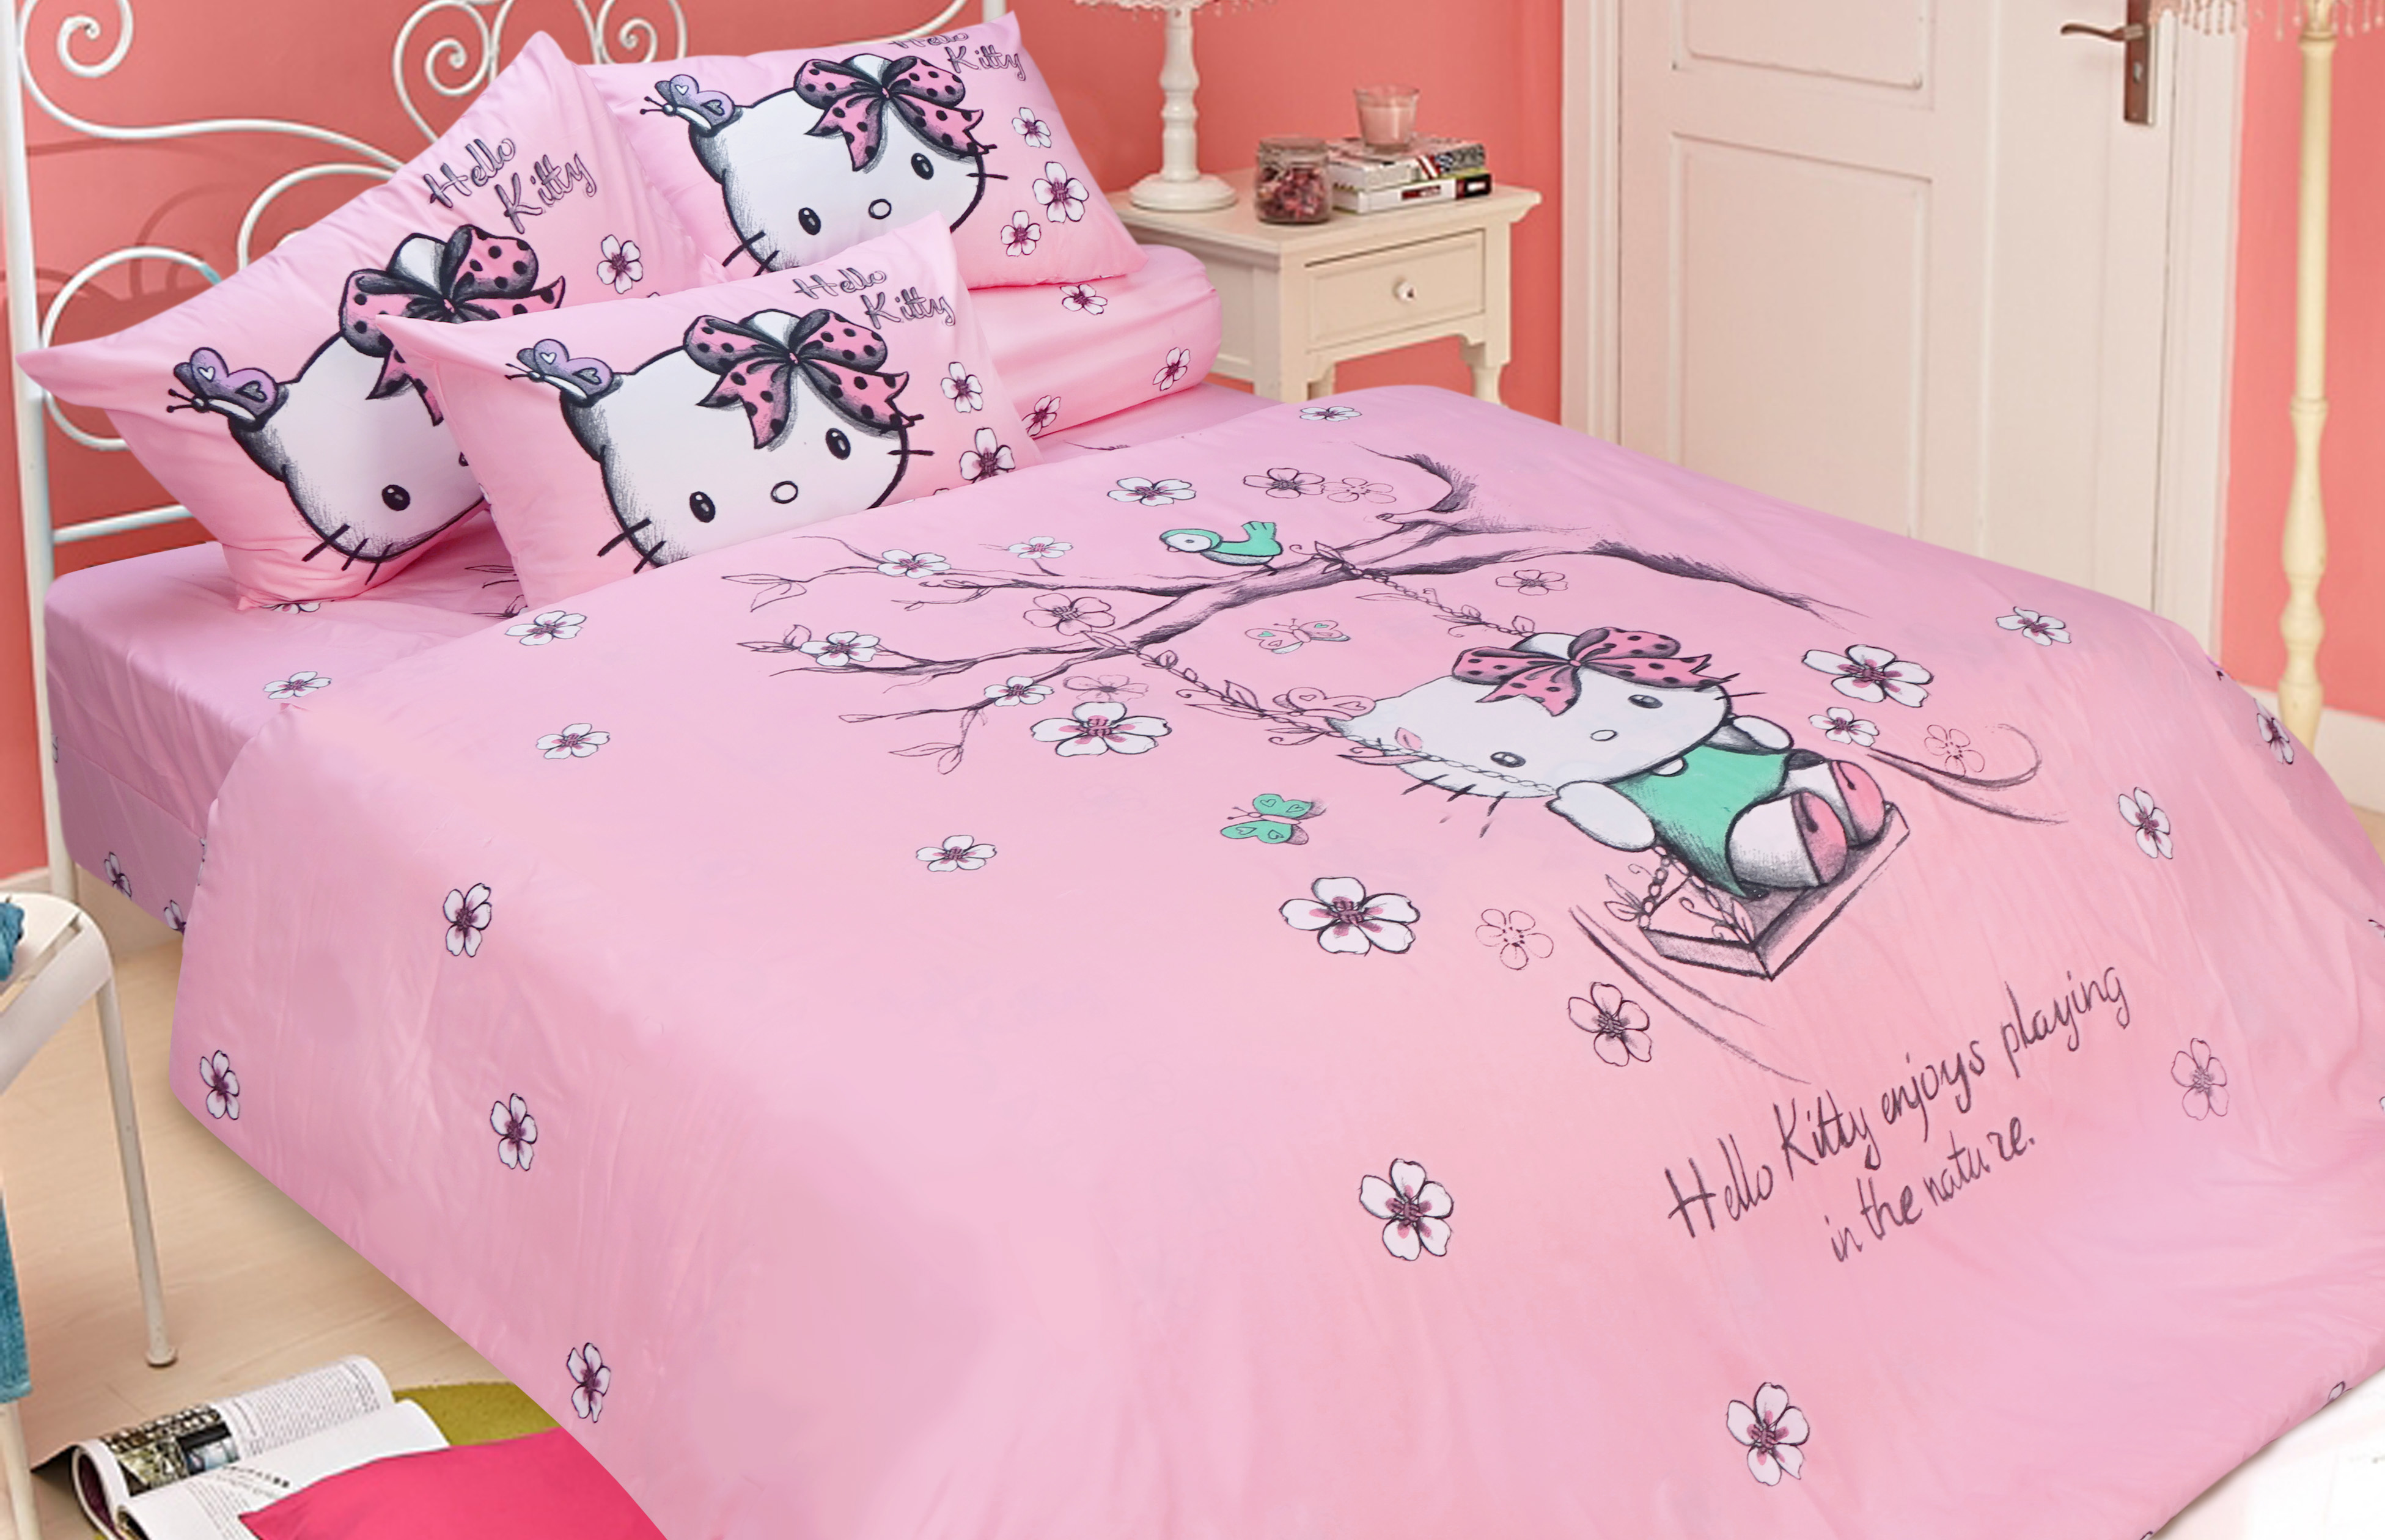 Rise Bed Cover Hello Kitty Nature Of Friend Pink Micro Fiber 360tc Rise Bedding